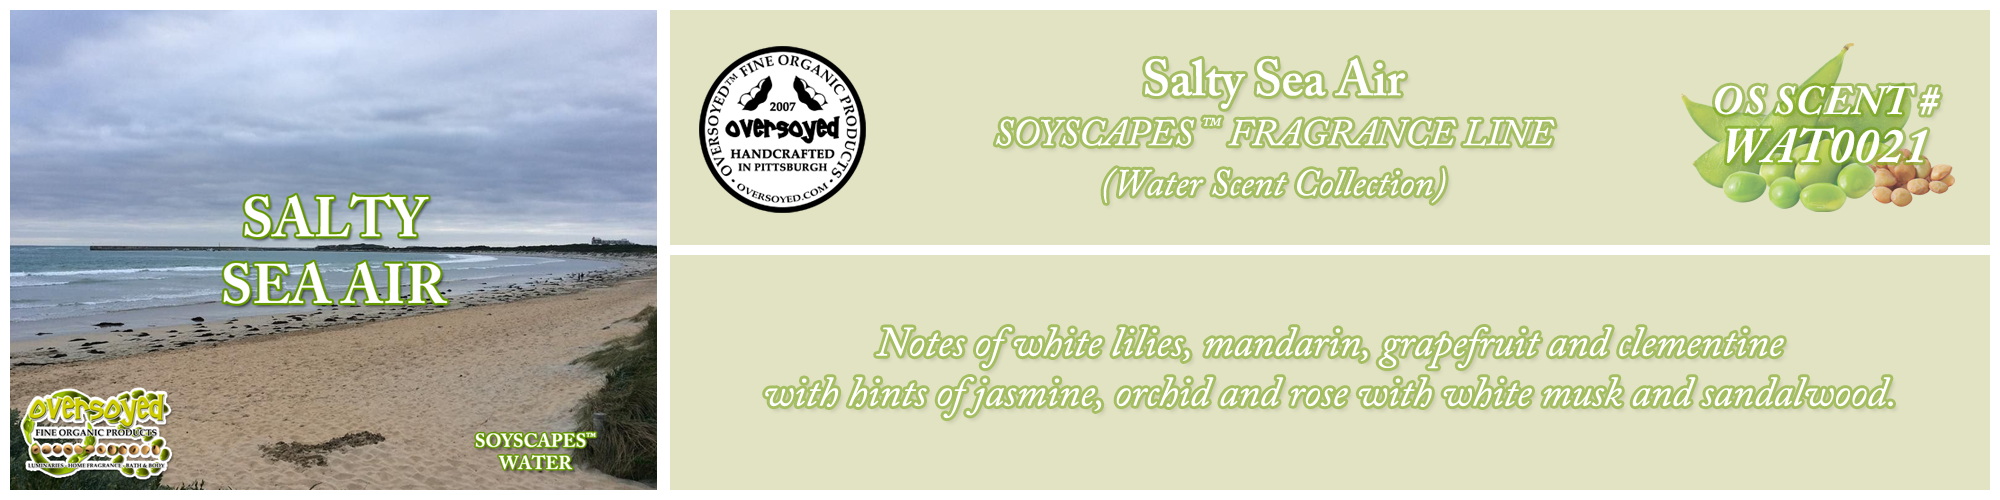 Salty Sea Air Handcrafted Products Collection